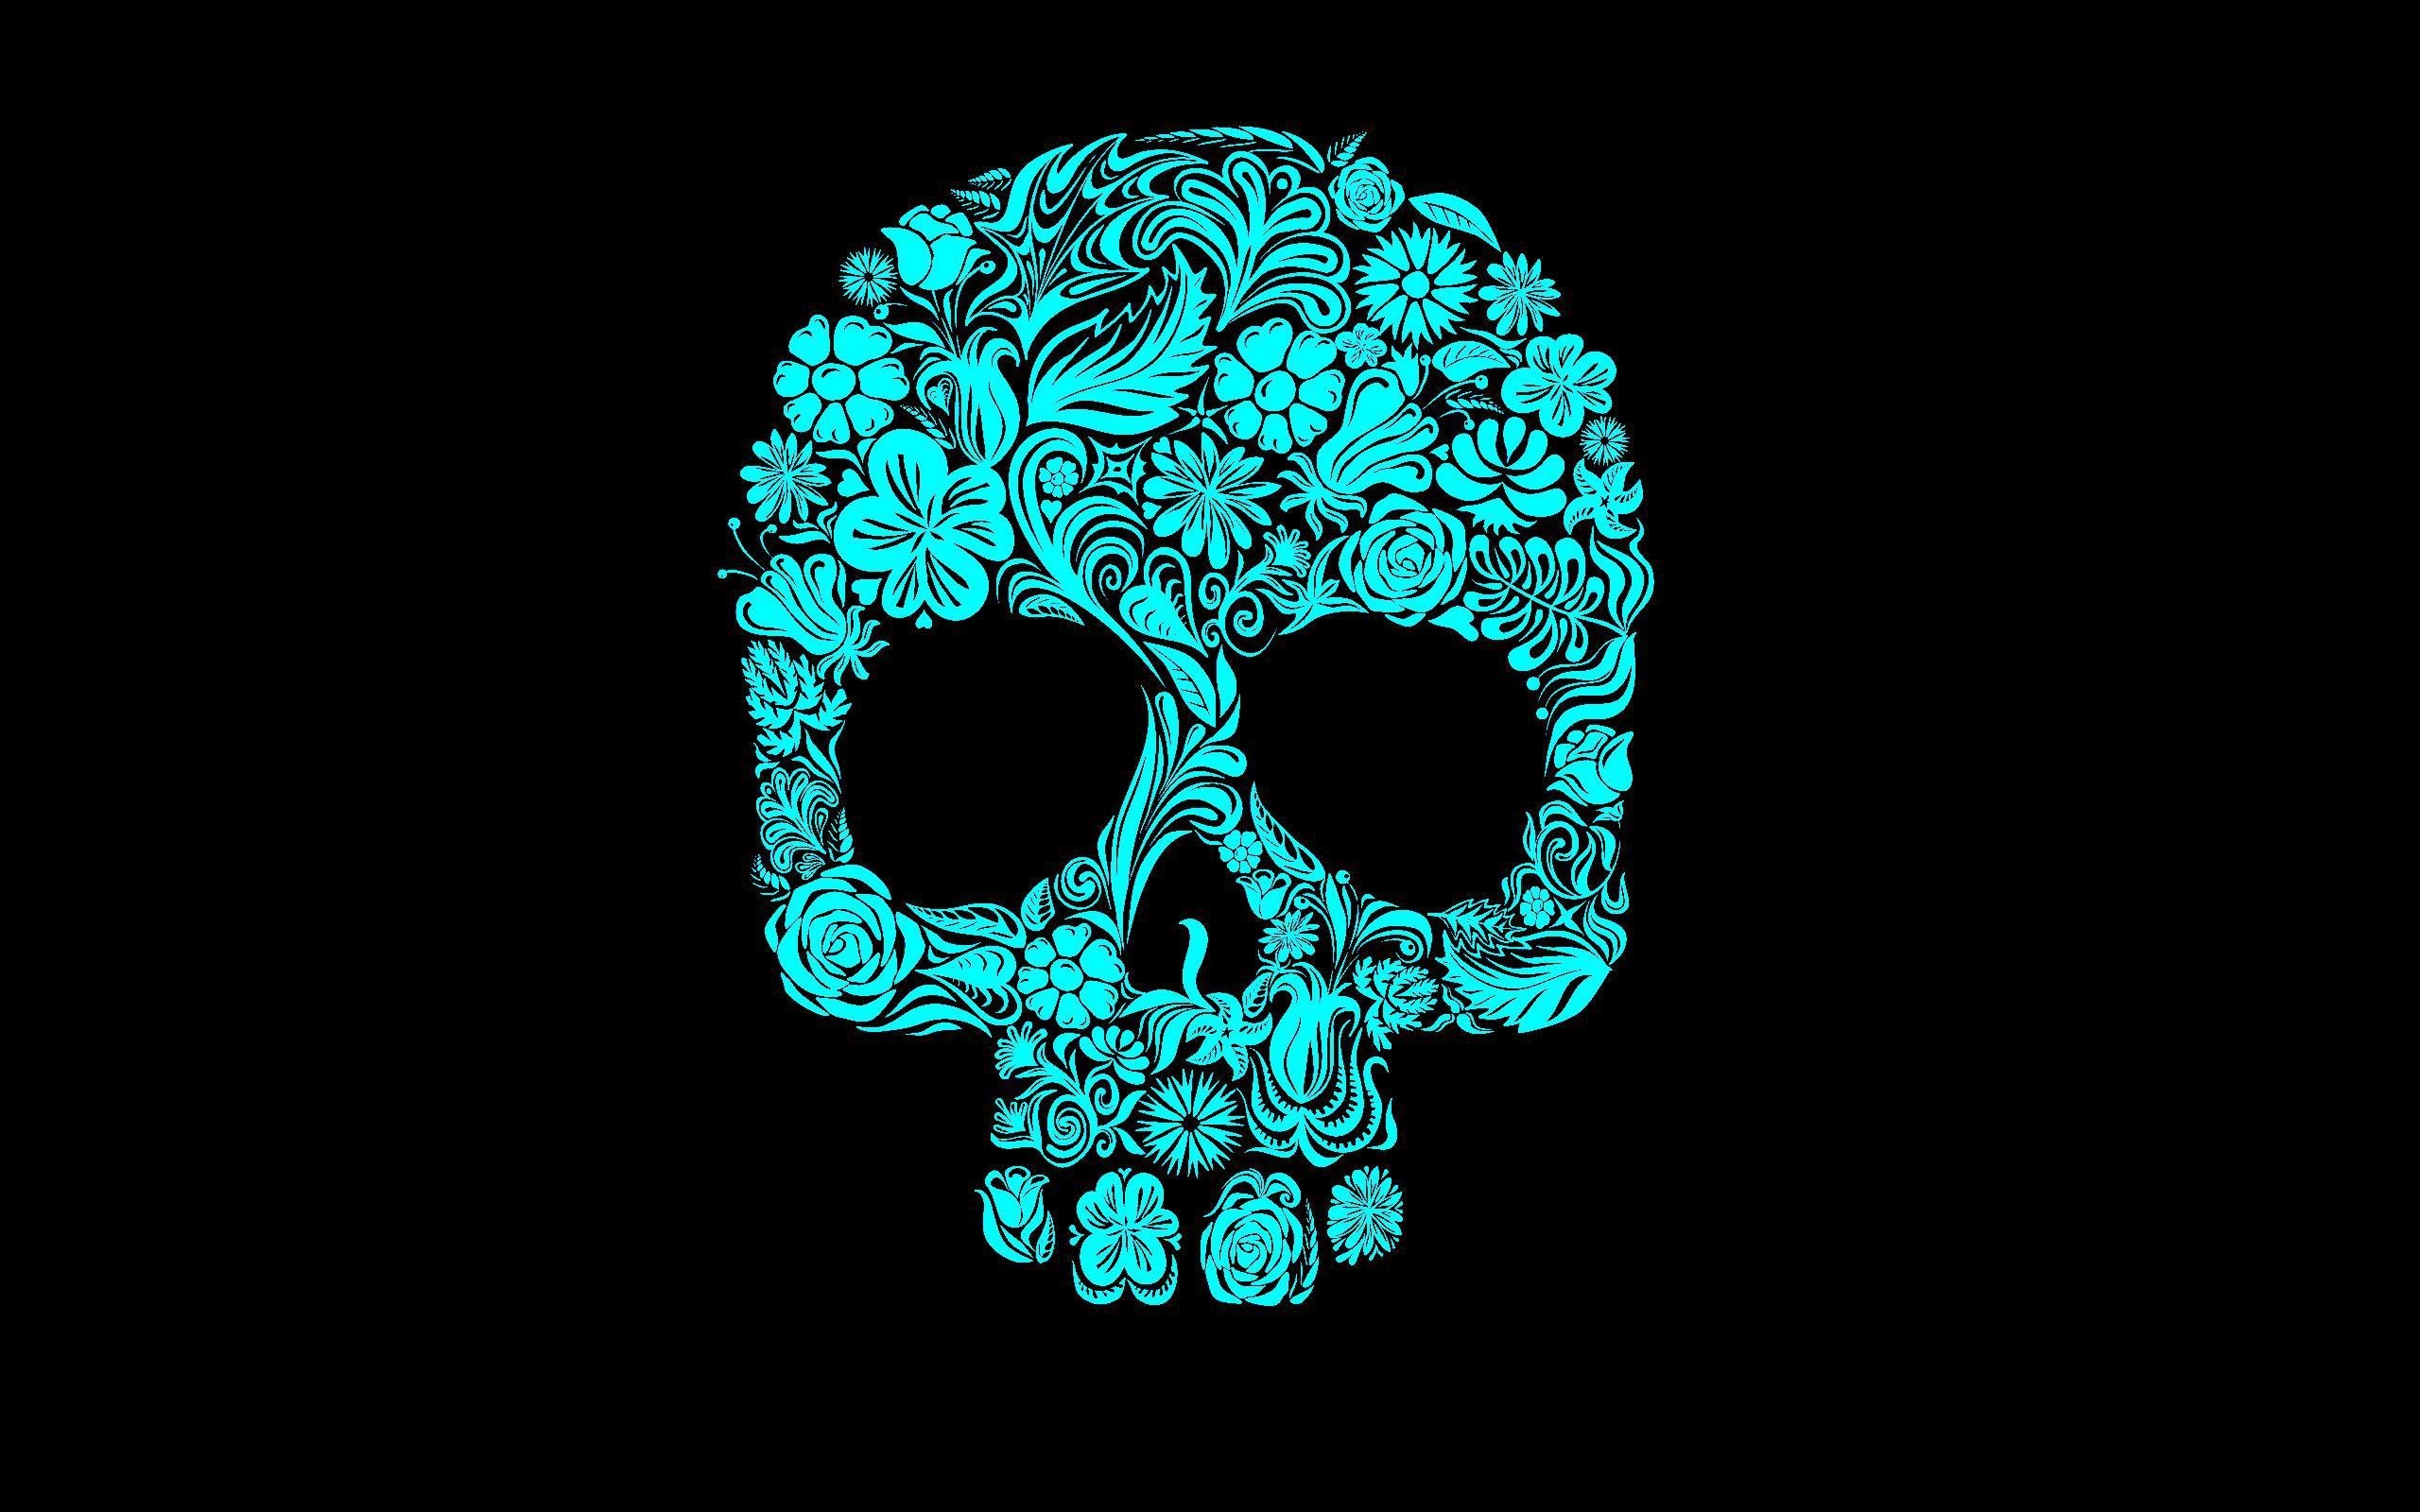 2560x1600 Teal blue floral sugar skull - (#160360) - High Quality and .